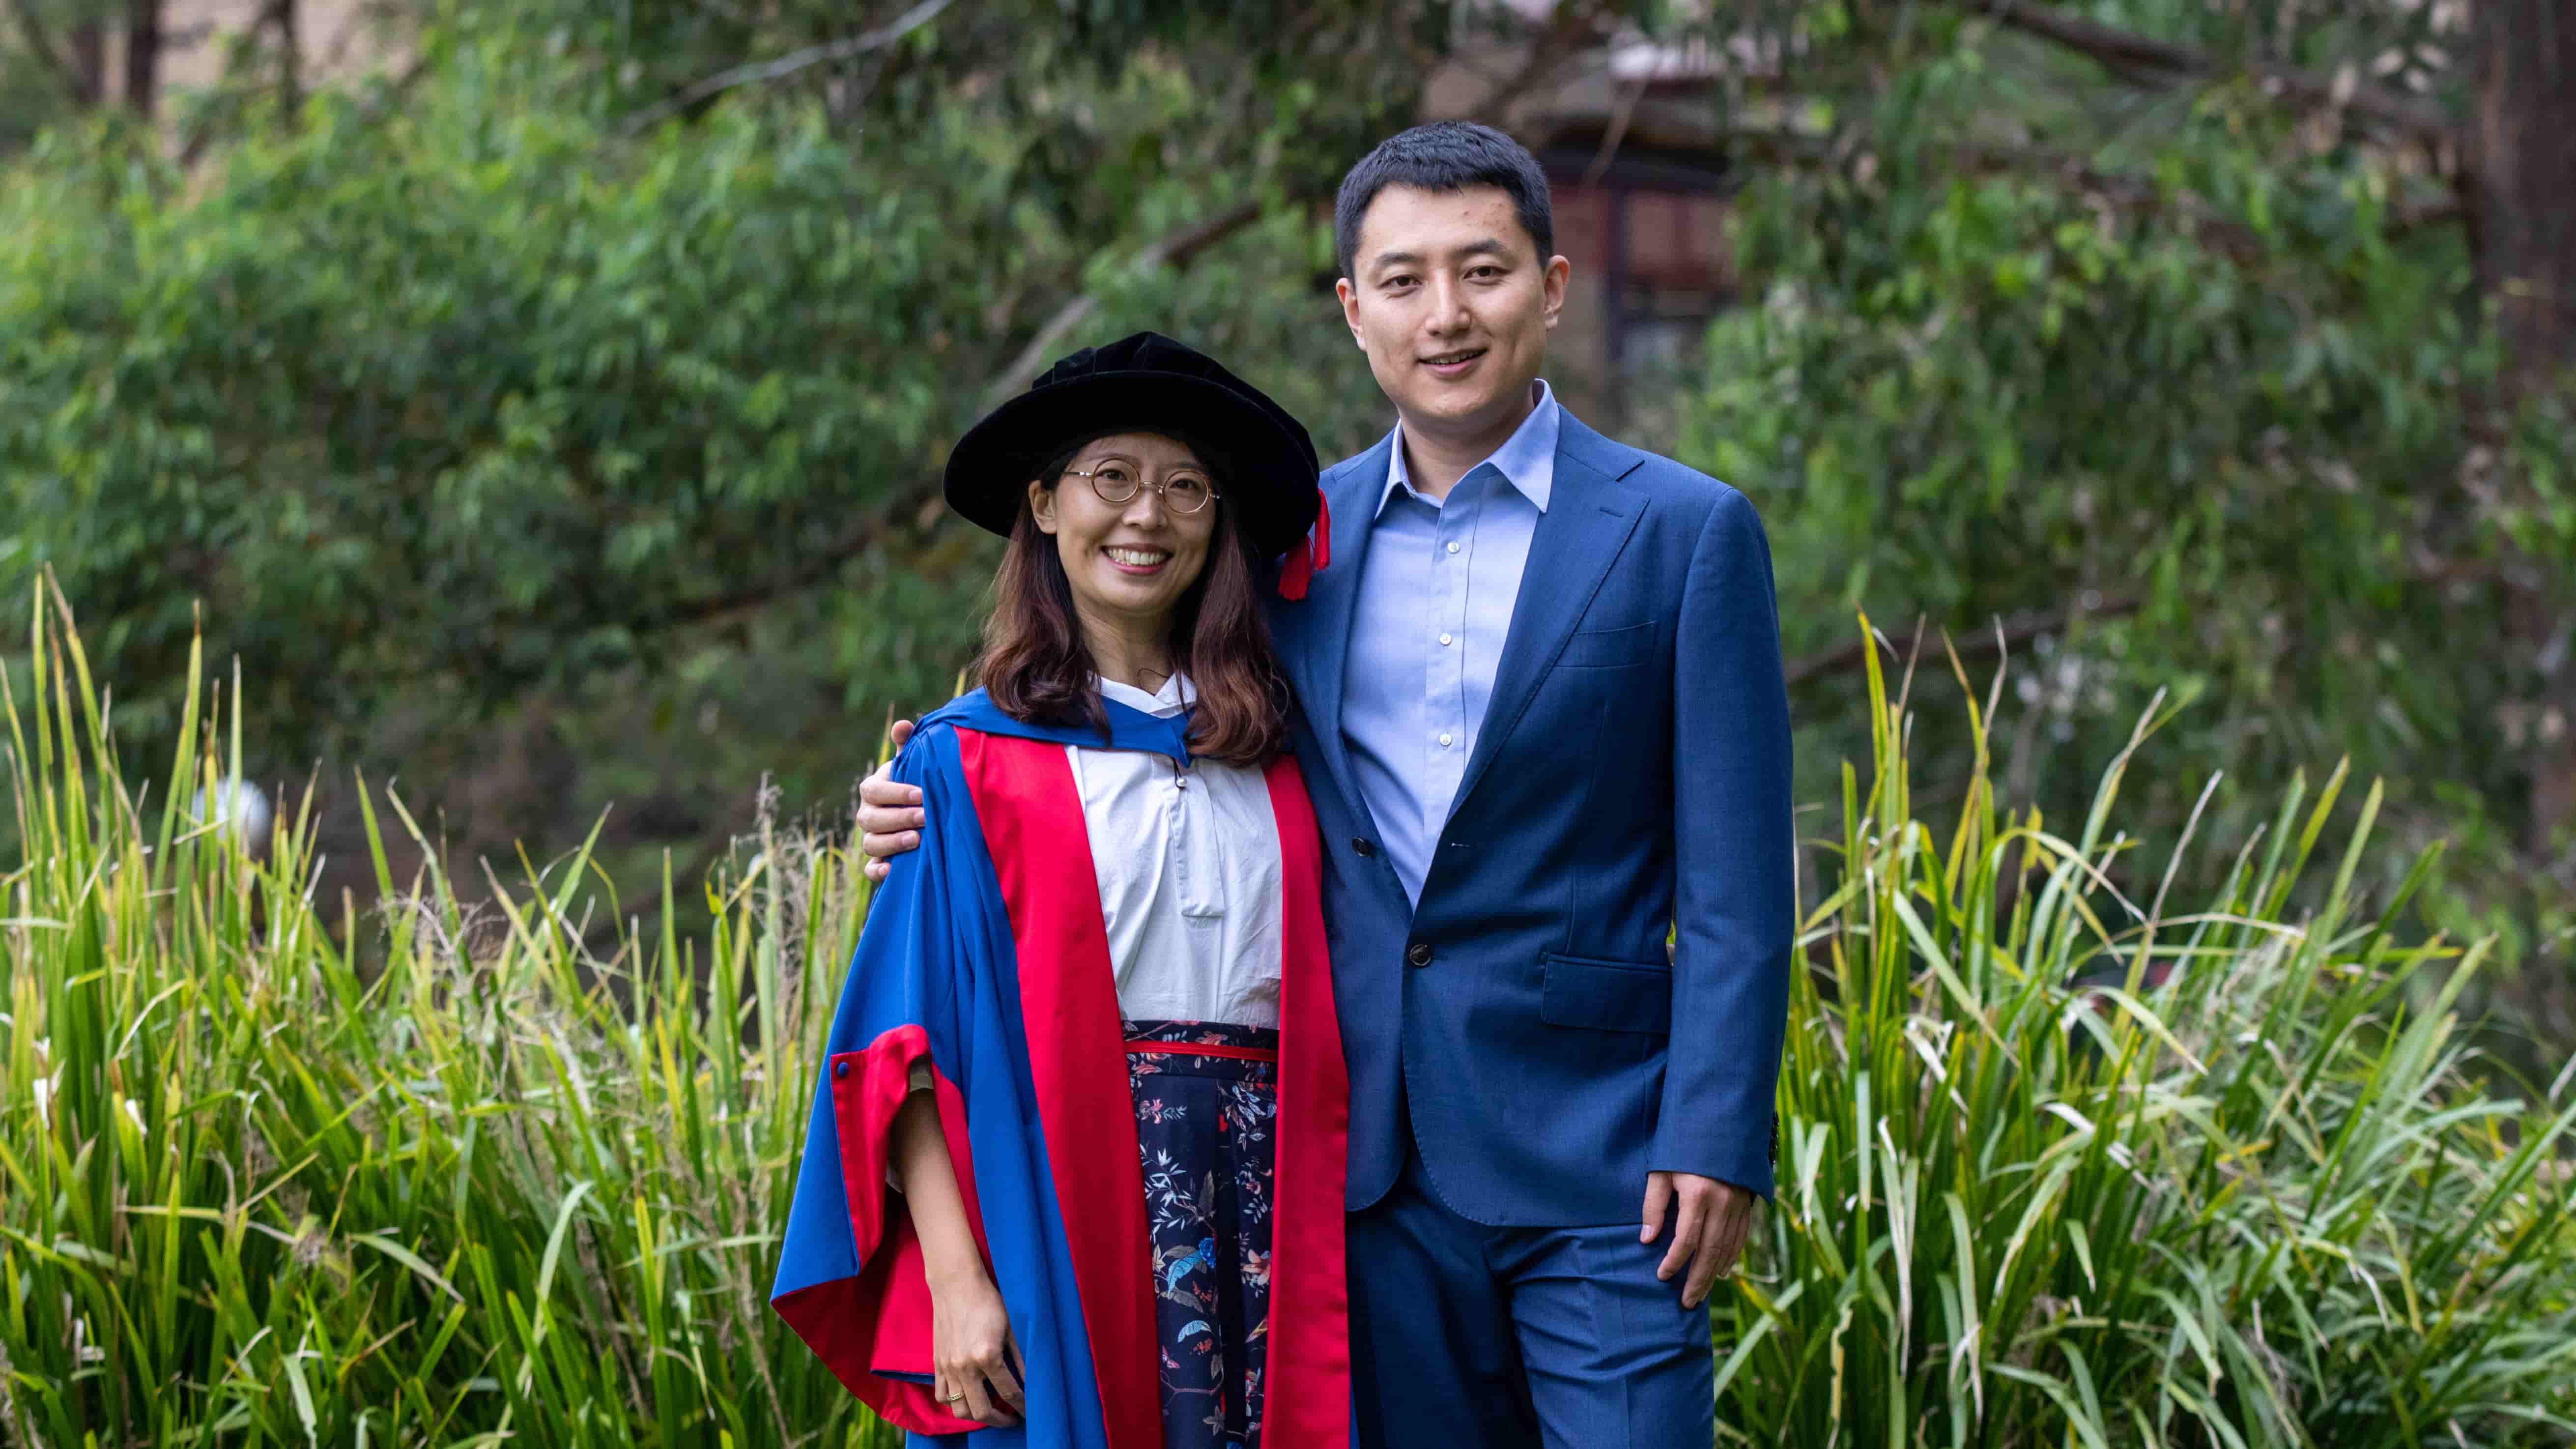 Jin Zhao and Helen Qiu stand closely after celebrating their engagement at graduation. Photo: Andy Zakeli